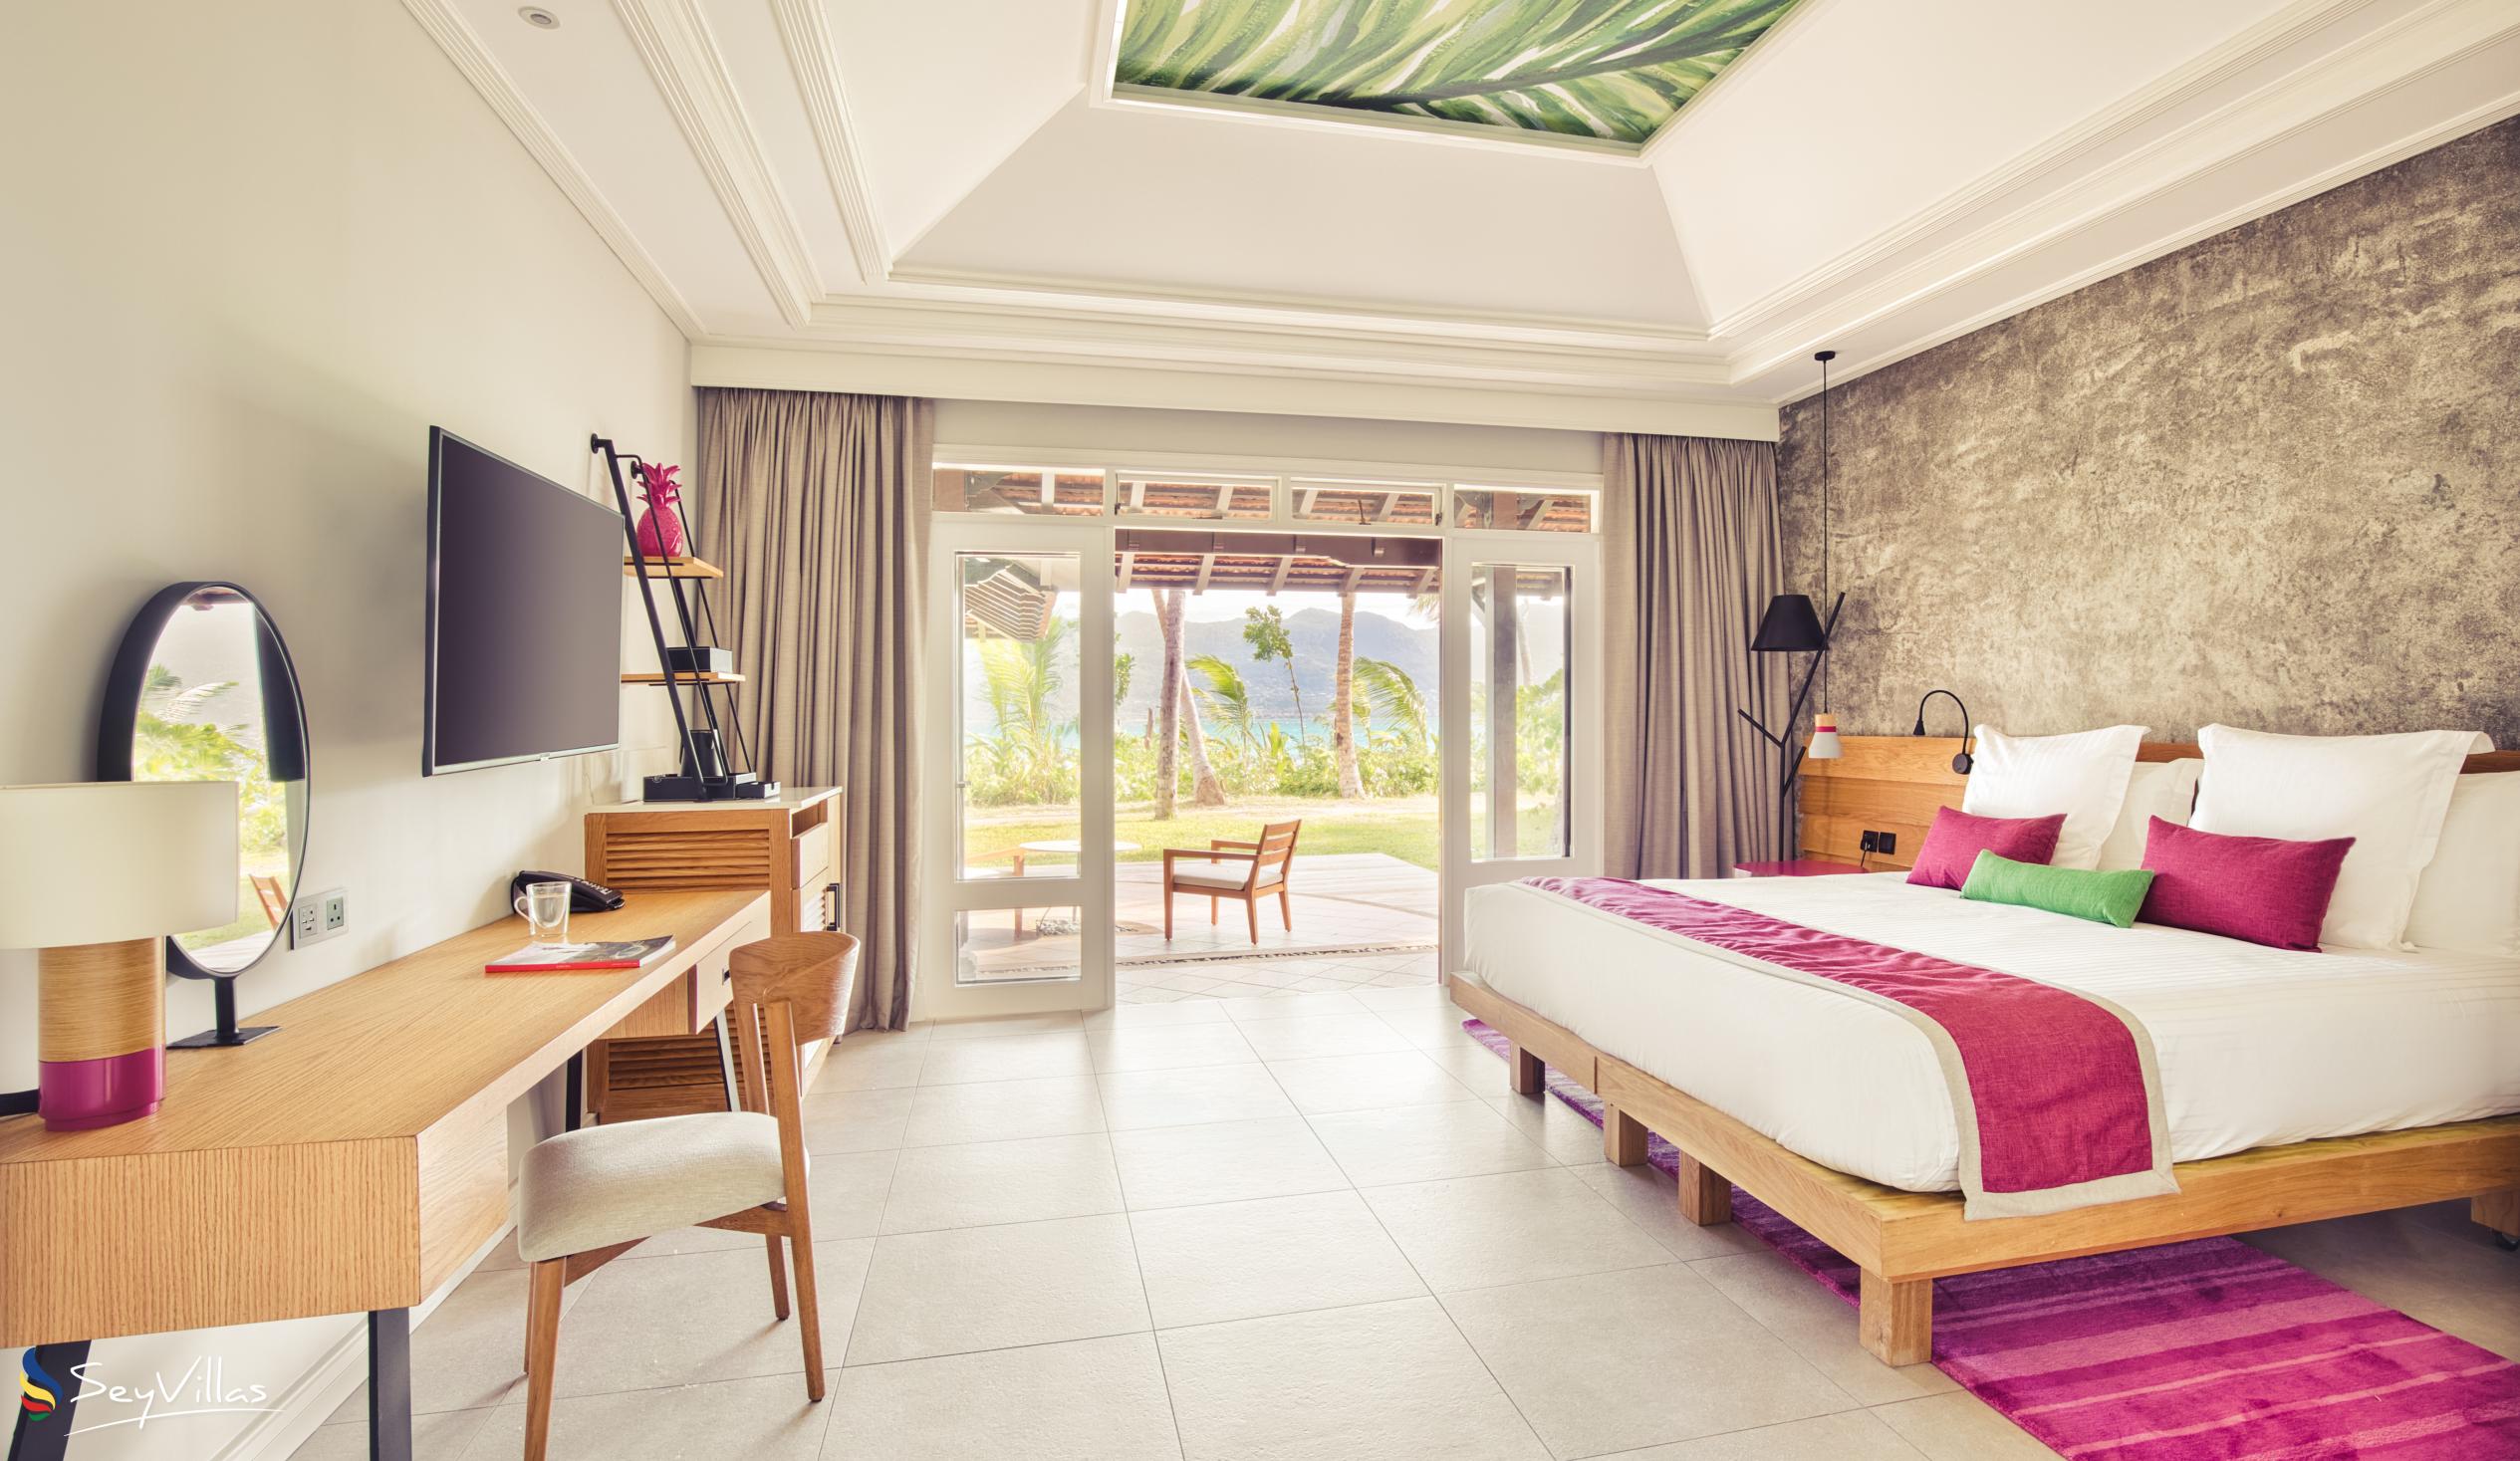 Photo 94: Club Med Seychelles - Family Suite with Private Pool - Saint Anne (Seychelles)